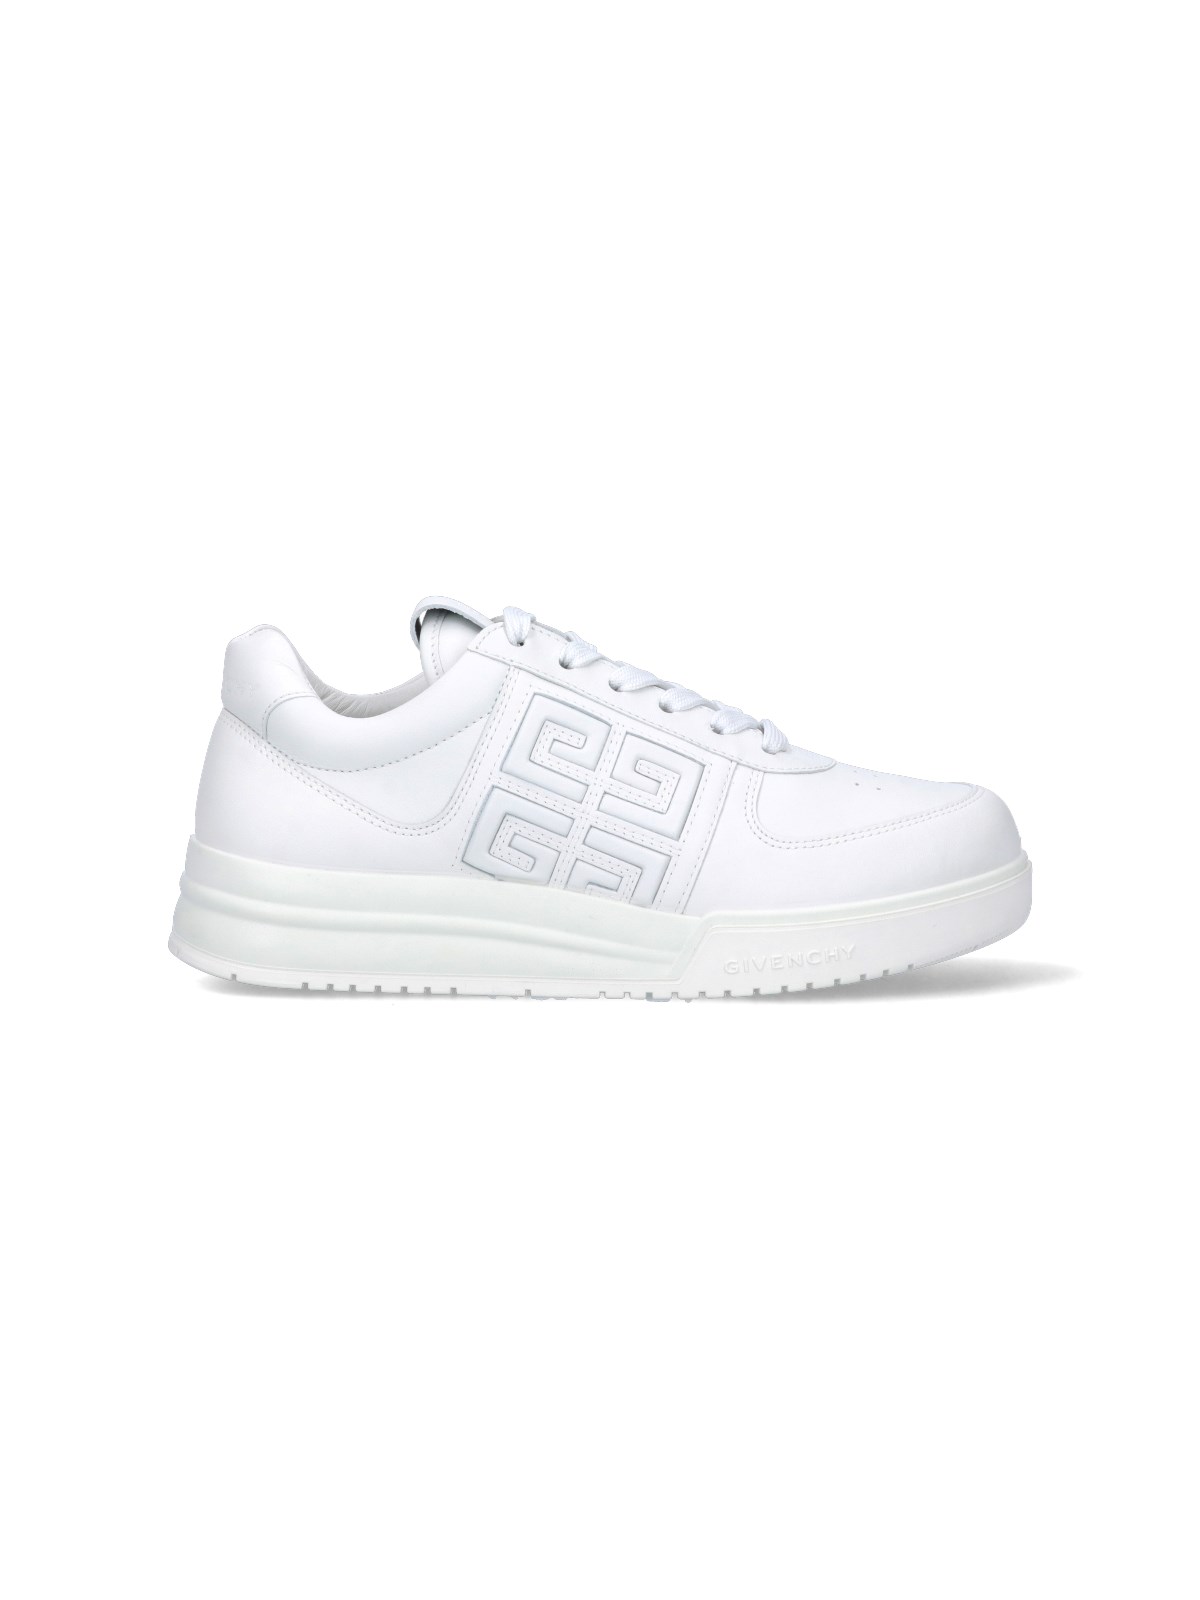 Givenchy G4 Glossed Leather Sneakers In White